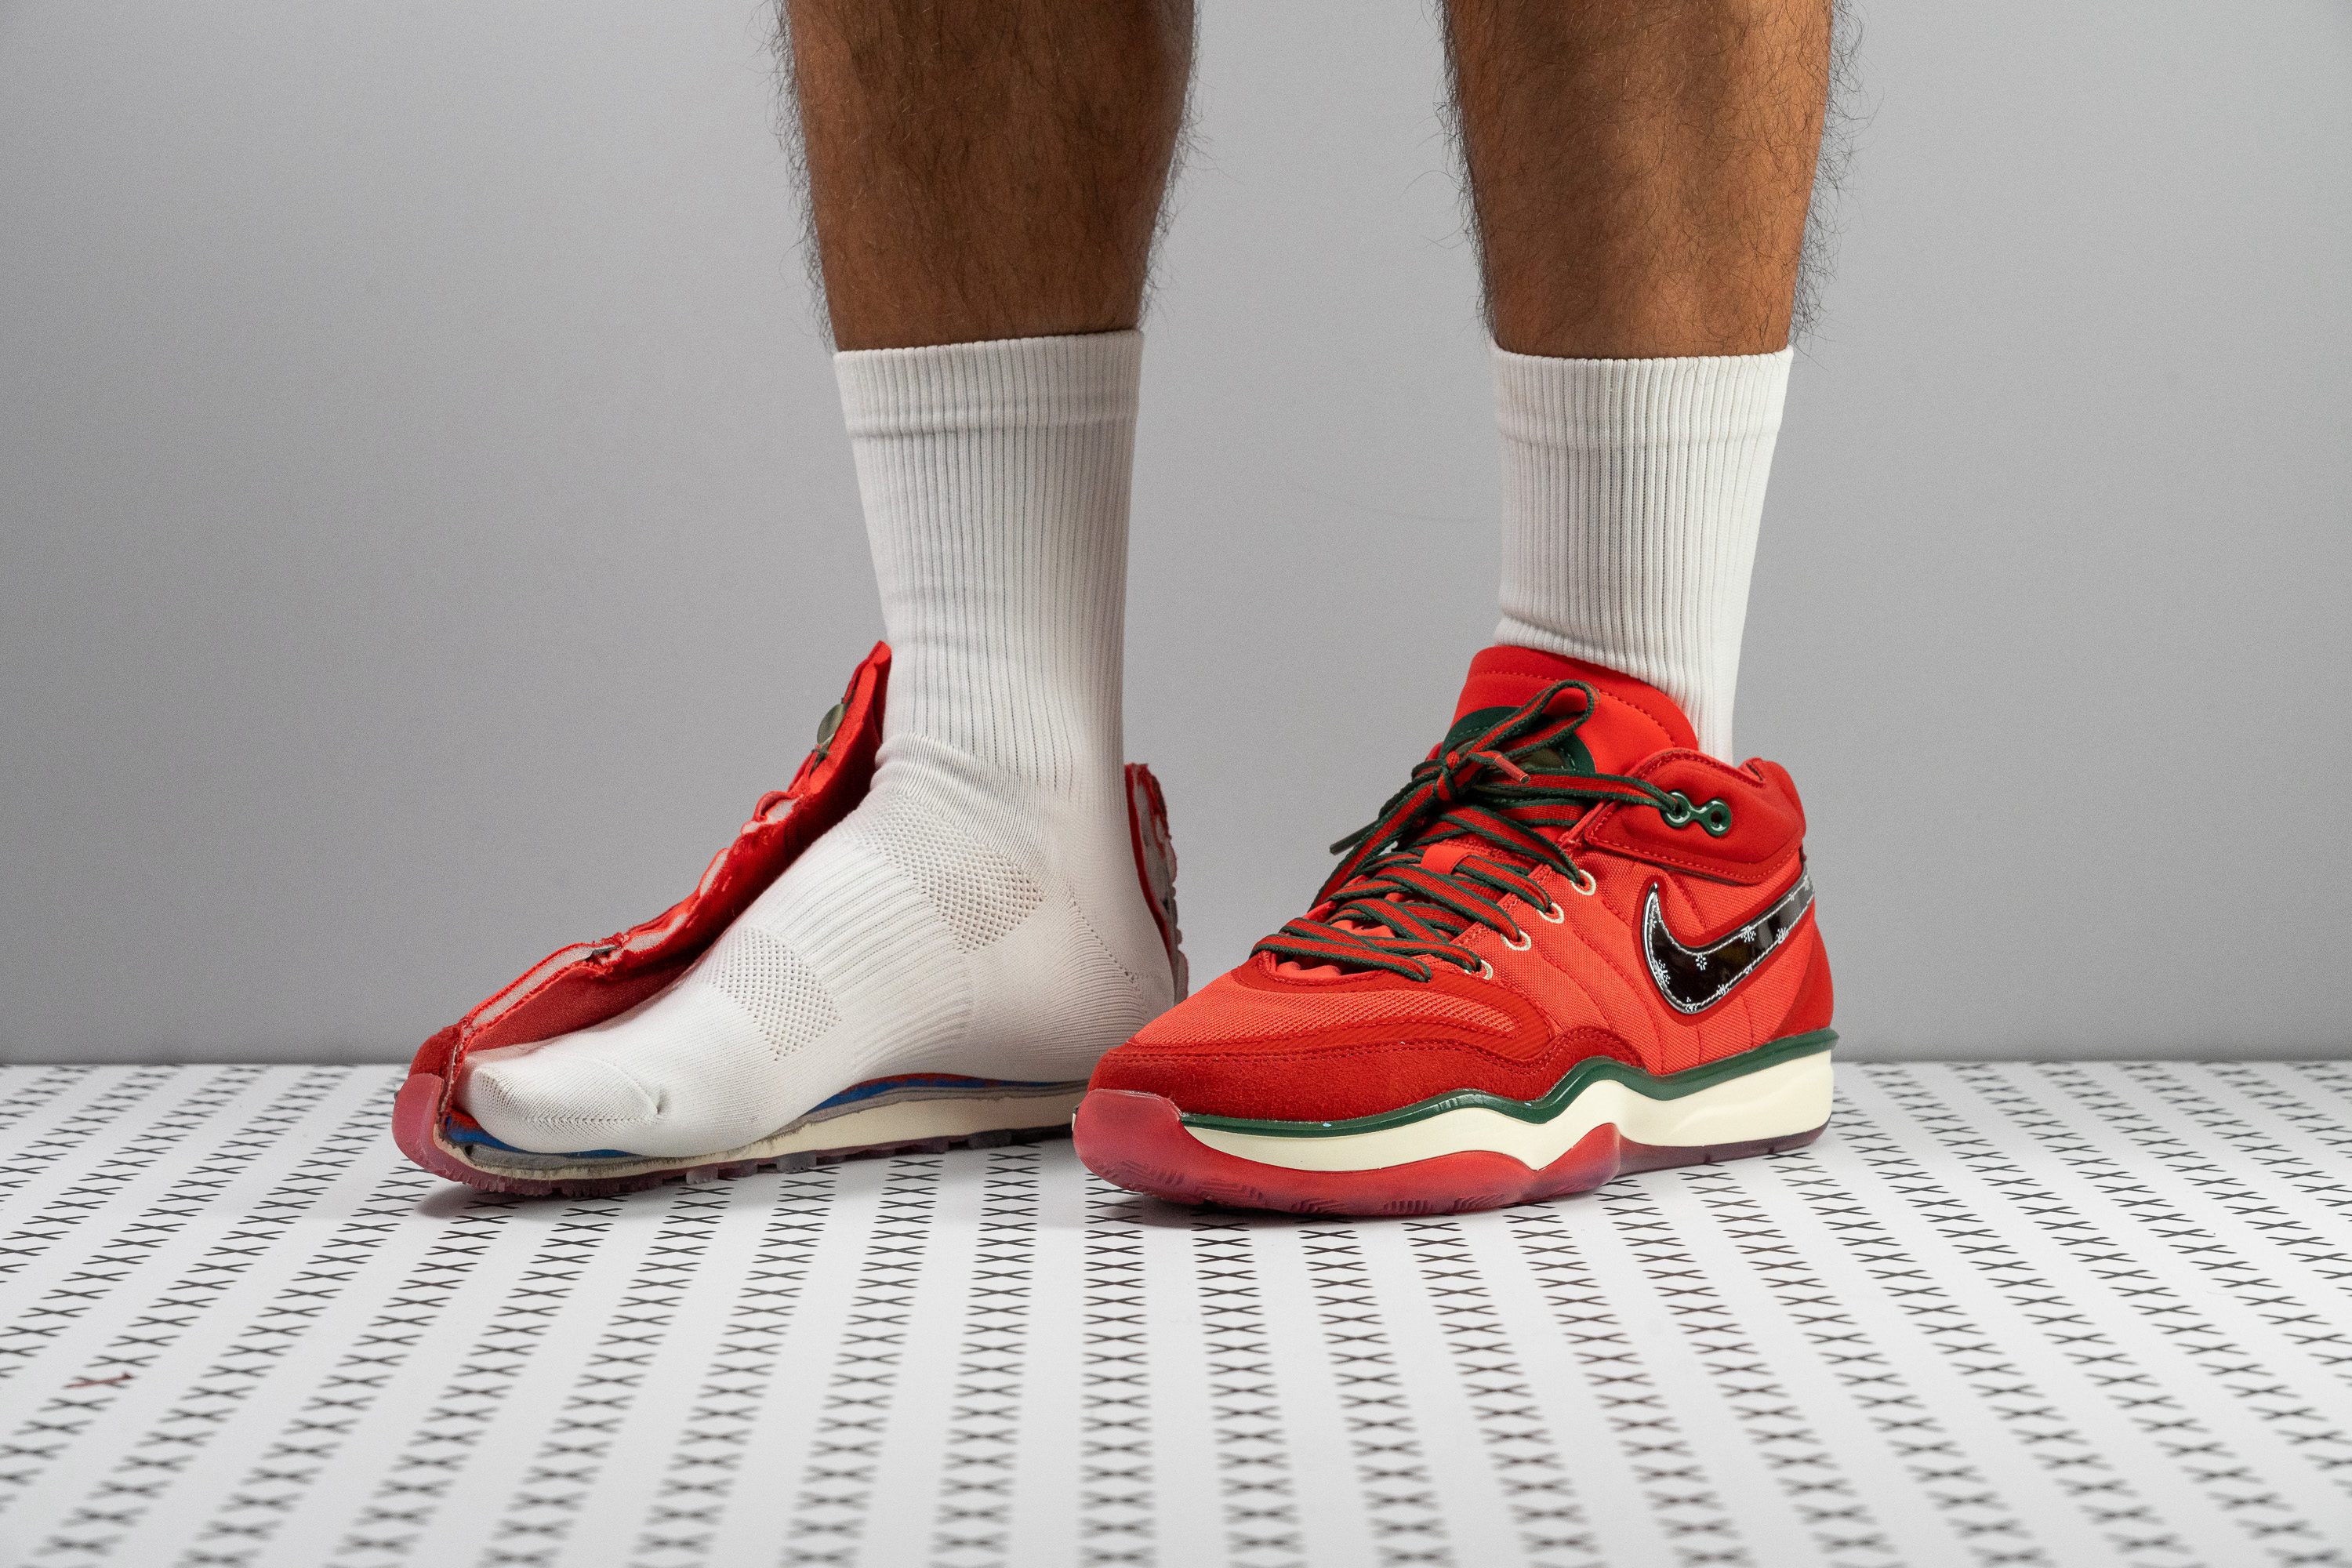 Nike G.T. Hustle 2 lab test and review